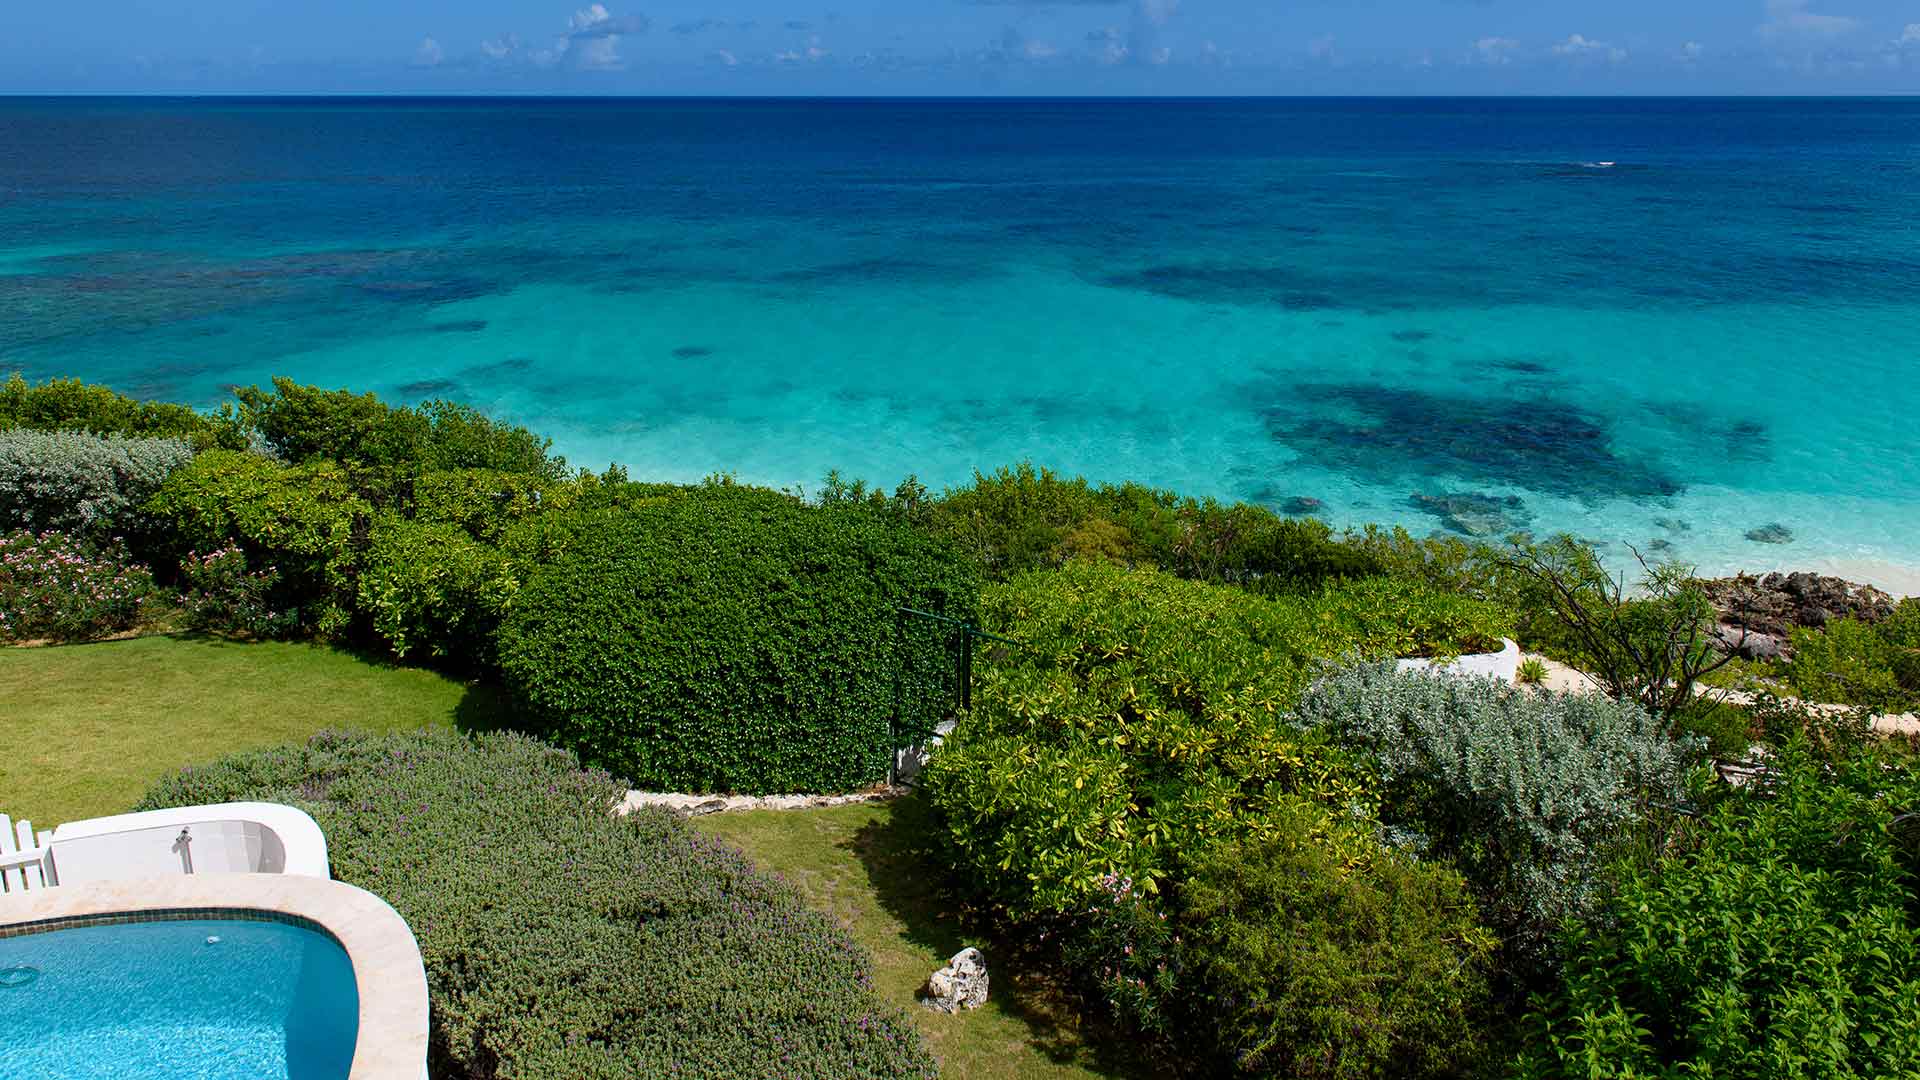 Guests can soak in the gorgeous Caribbean views from nearly every room at Black Pearl VIlla.